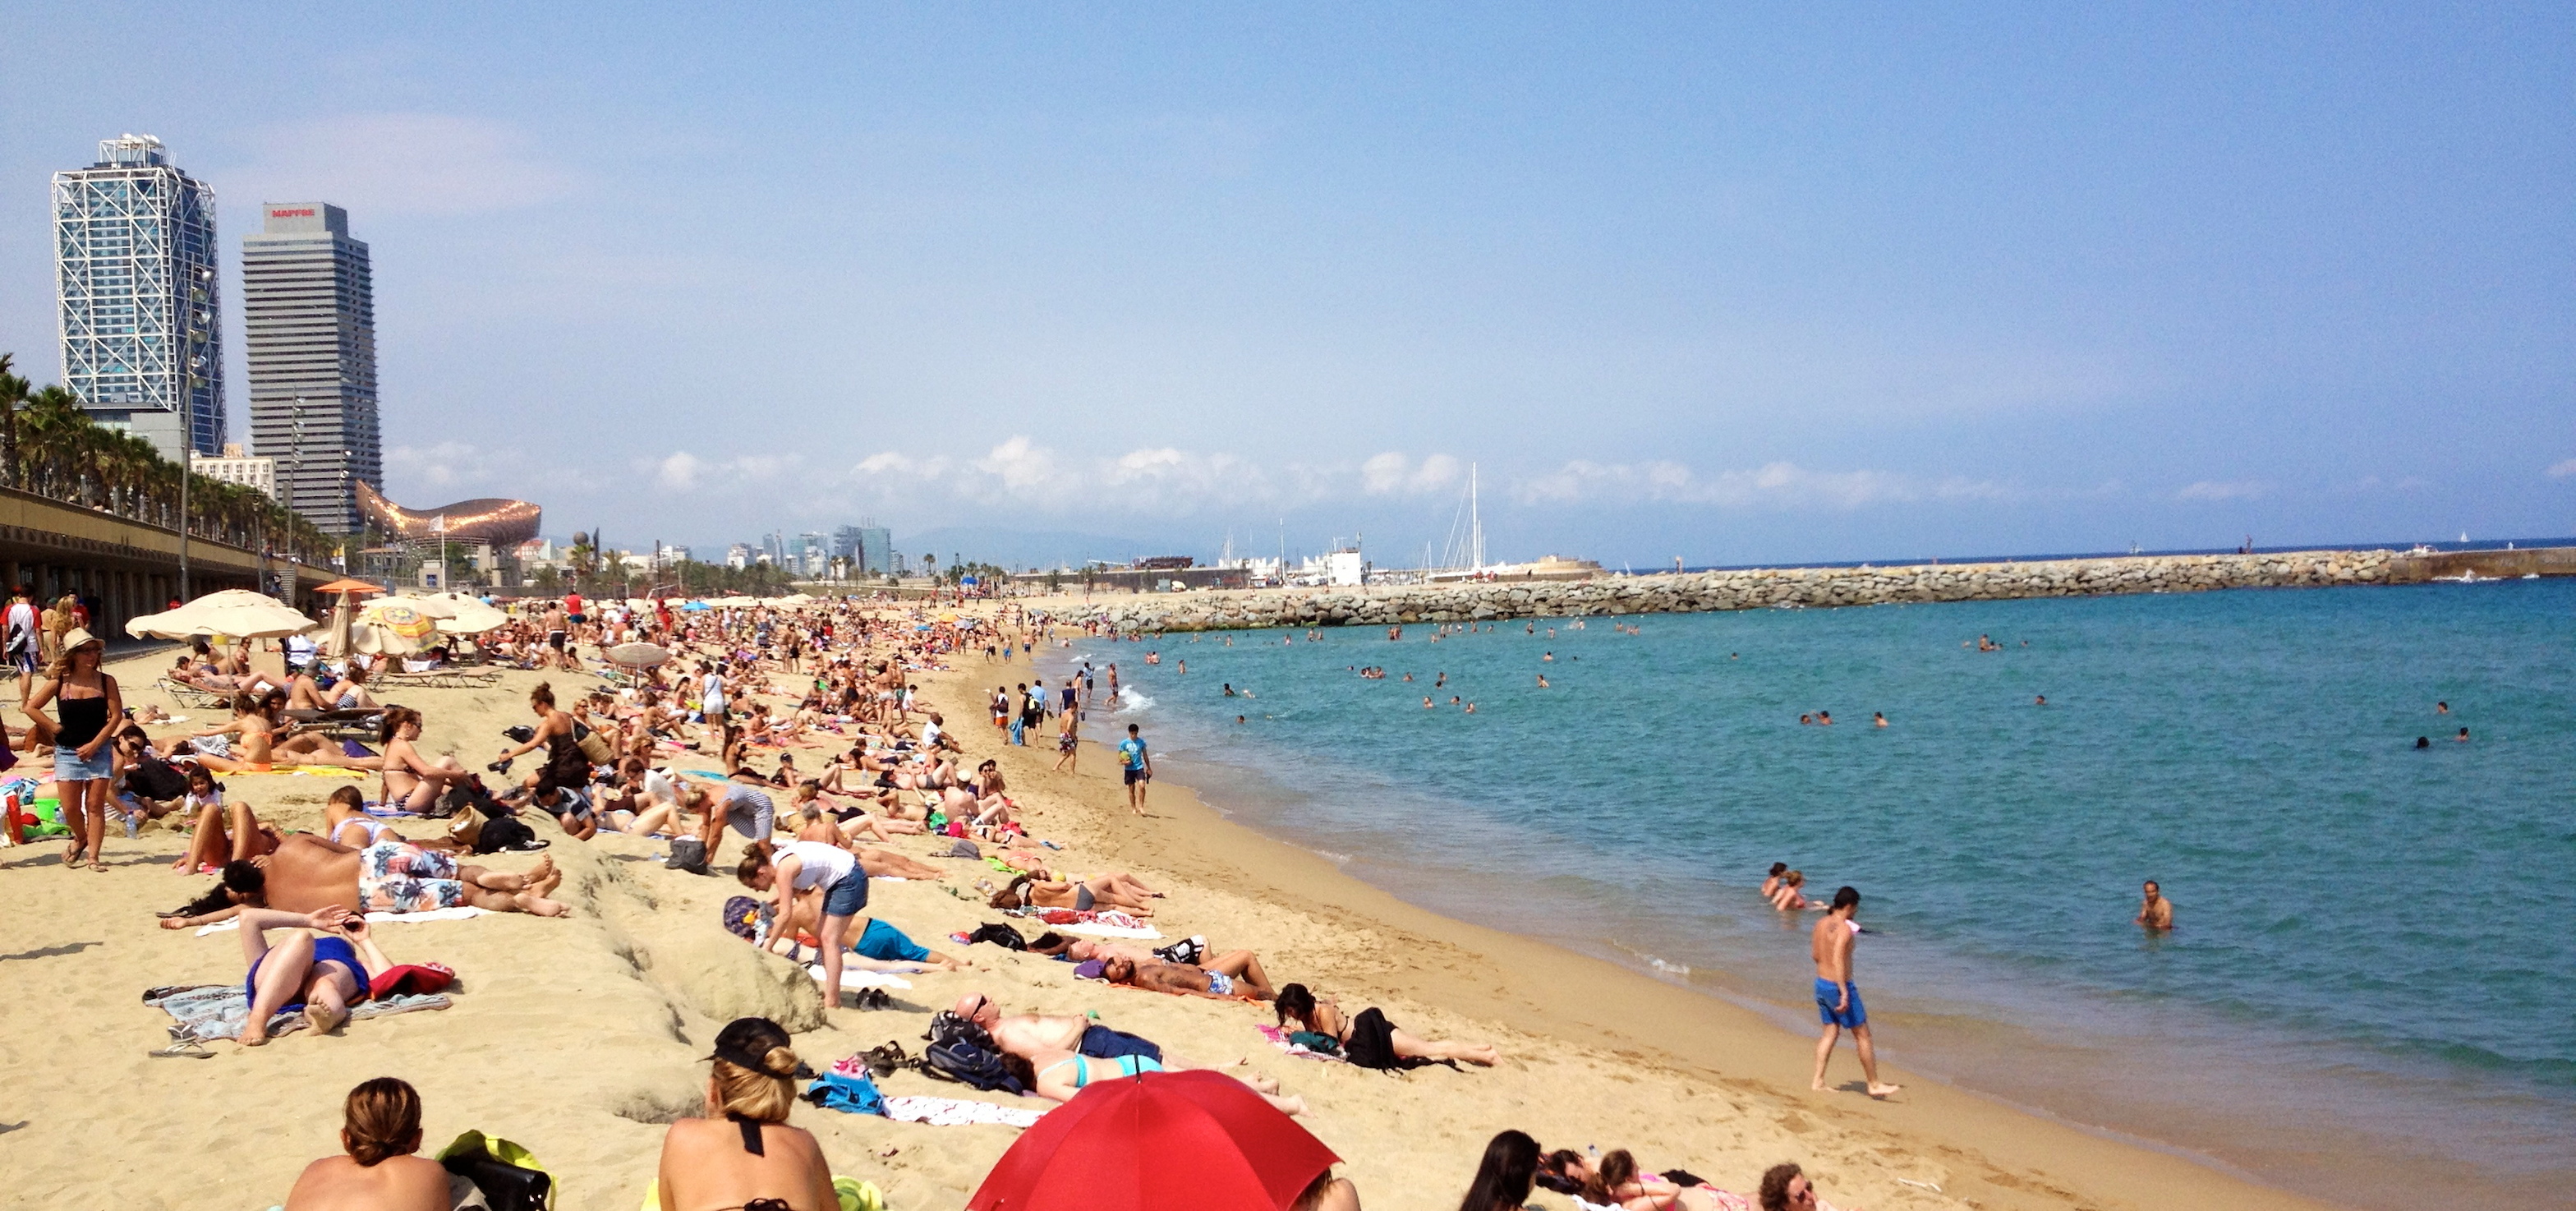 Barcelona Activities: Beaches, Tapas, and Vibrant Culture